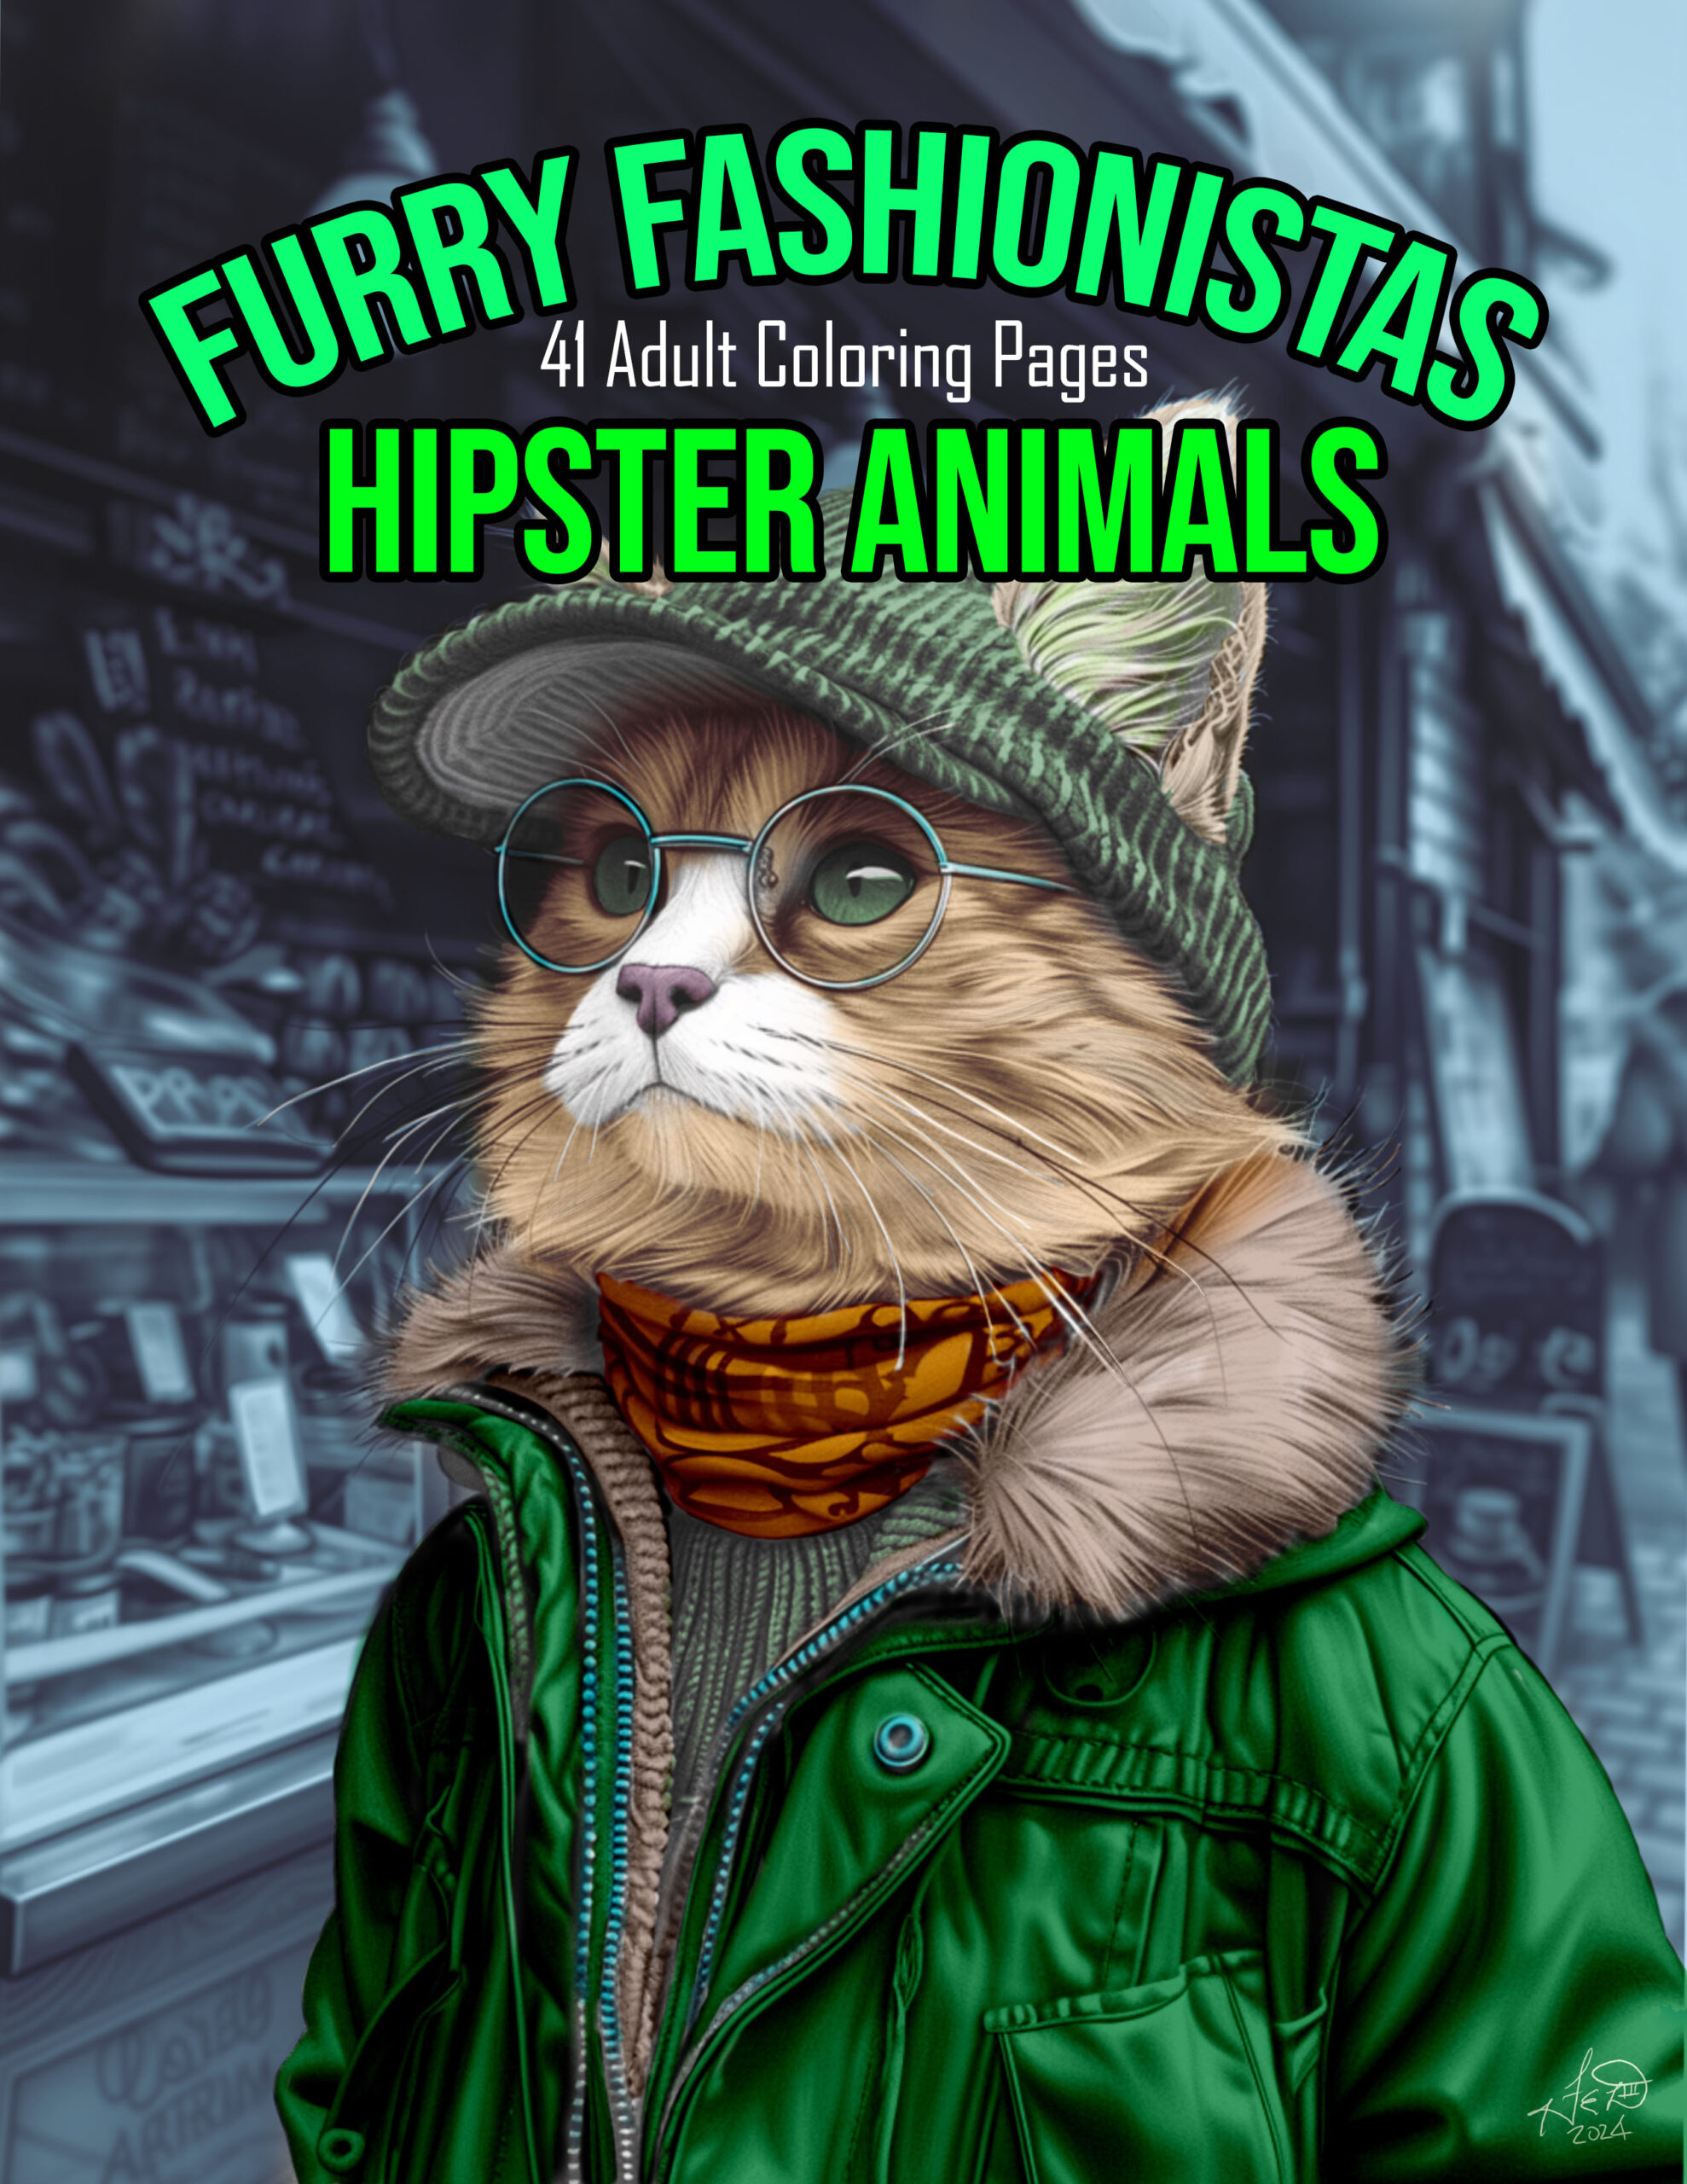 Furry Fashionistas Hipster Animals Adult Coloring Book